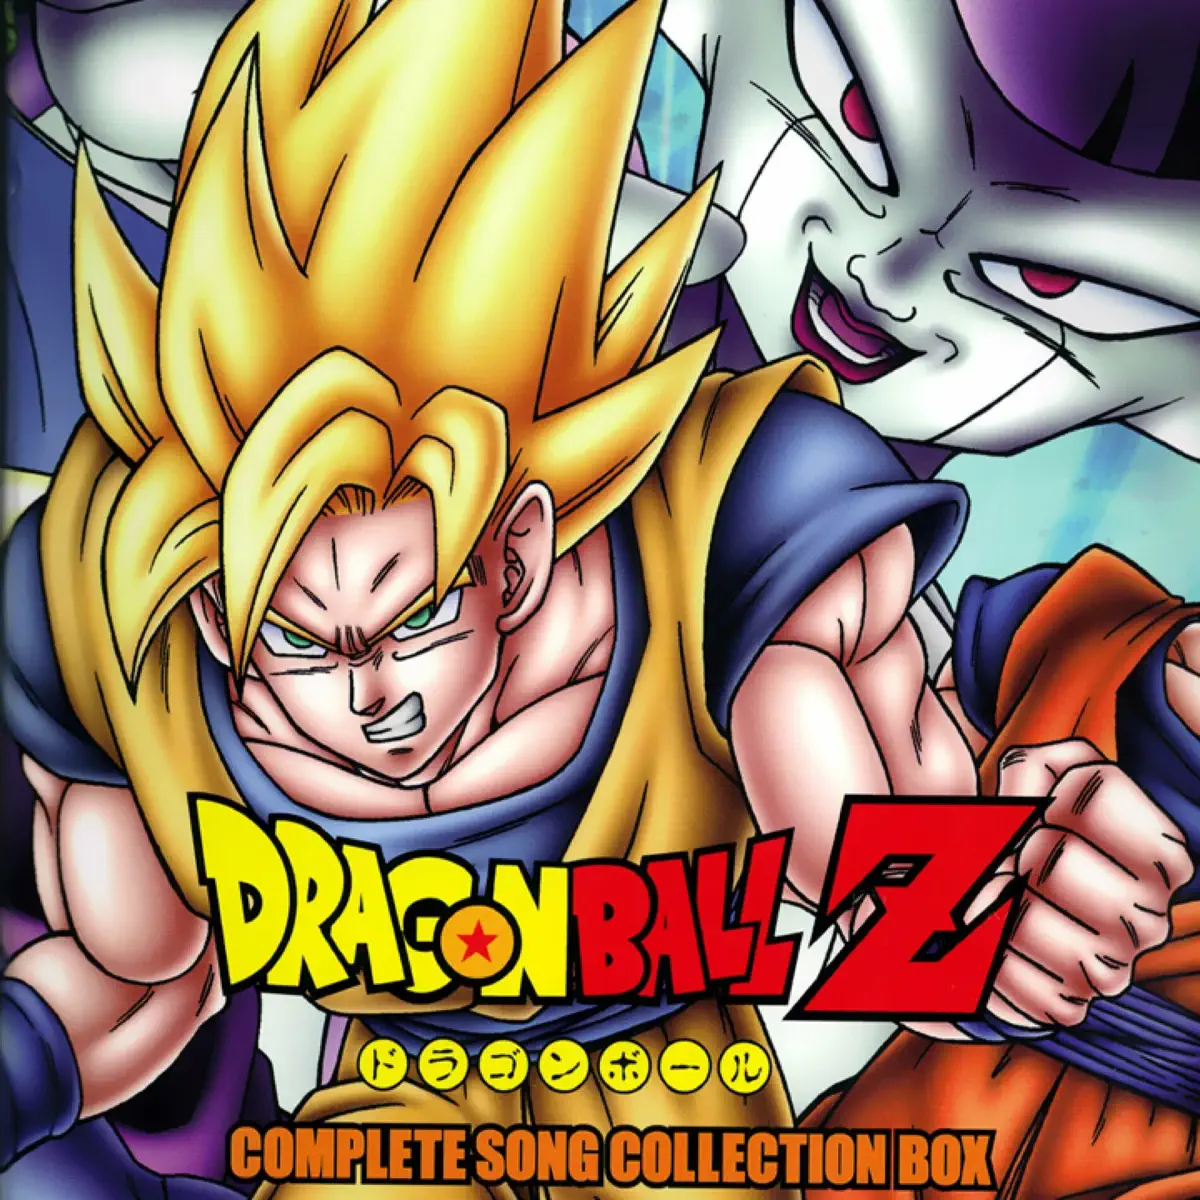 Dragon Ball - 龙珠 Complete Song Collection Box, Vol. 3 (2023) [iTunes Plus AAC M4A]-新房子